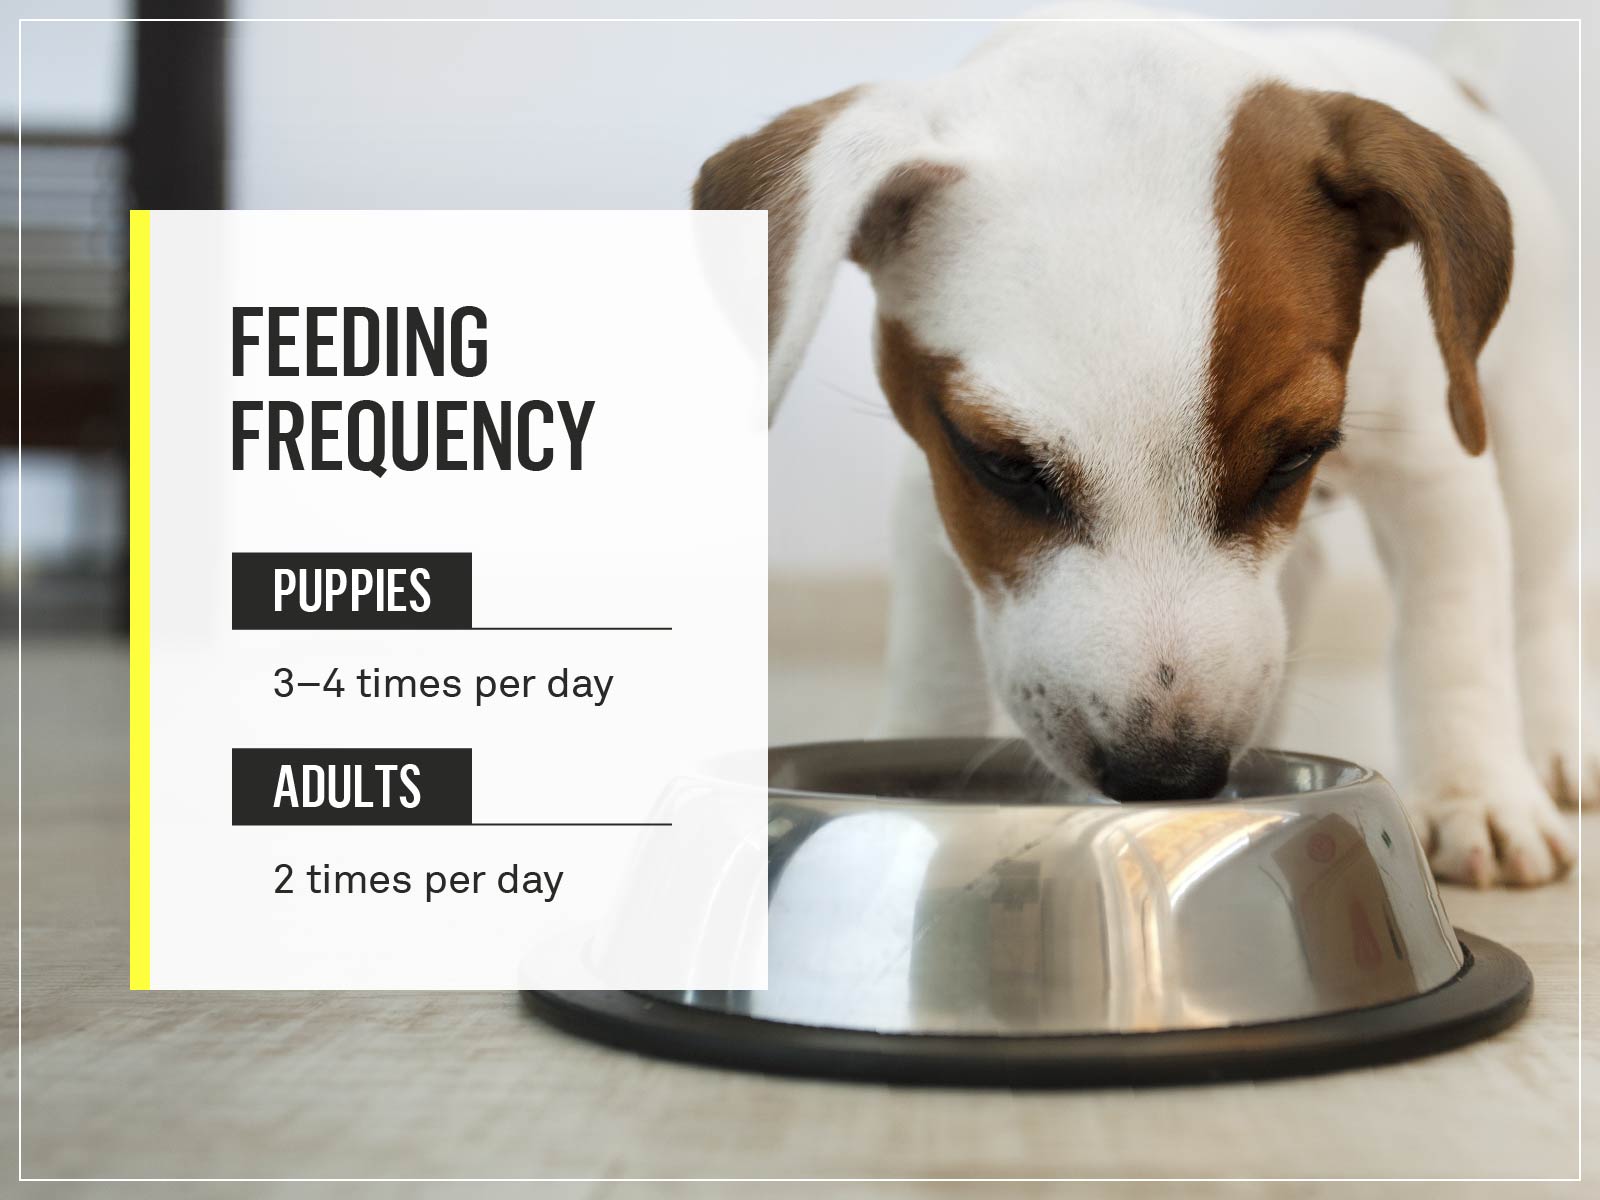 How Much Should I Feed My Pet?